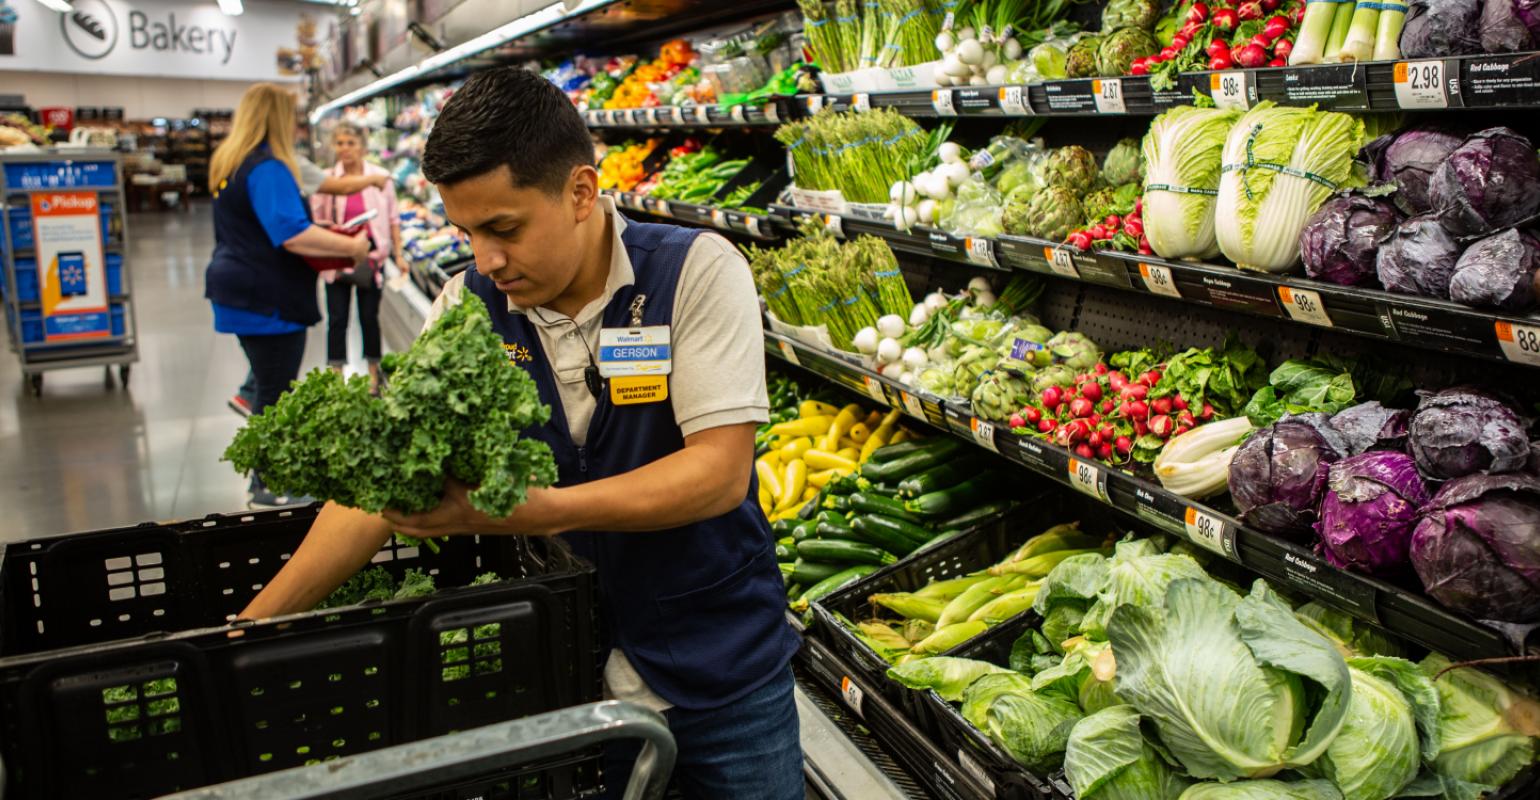 Fighting food waste in the produce aisle